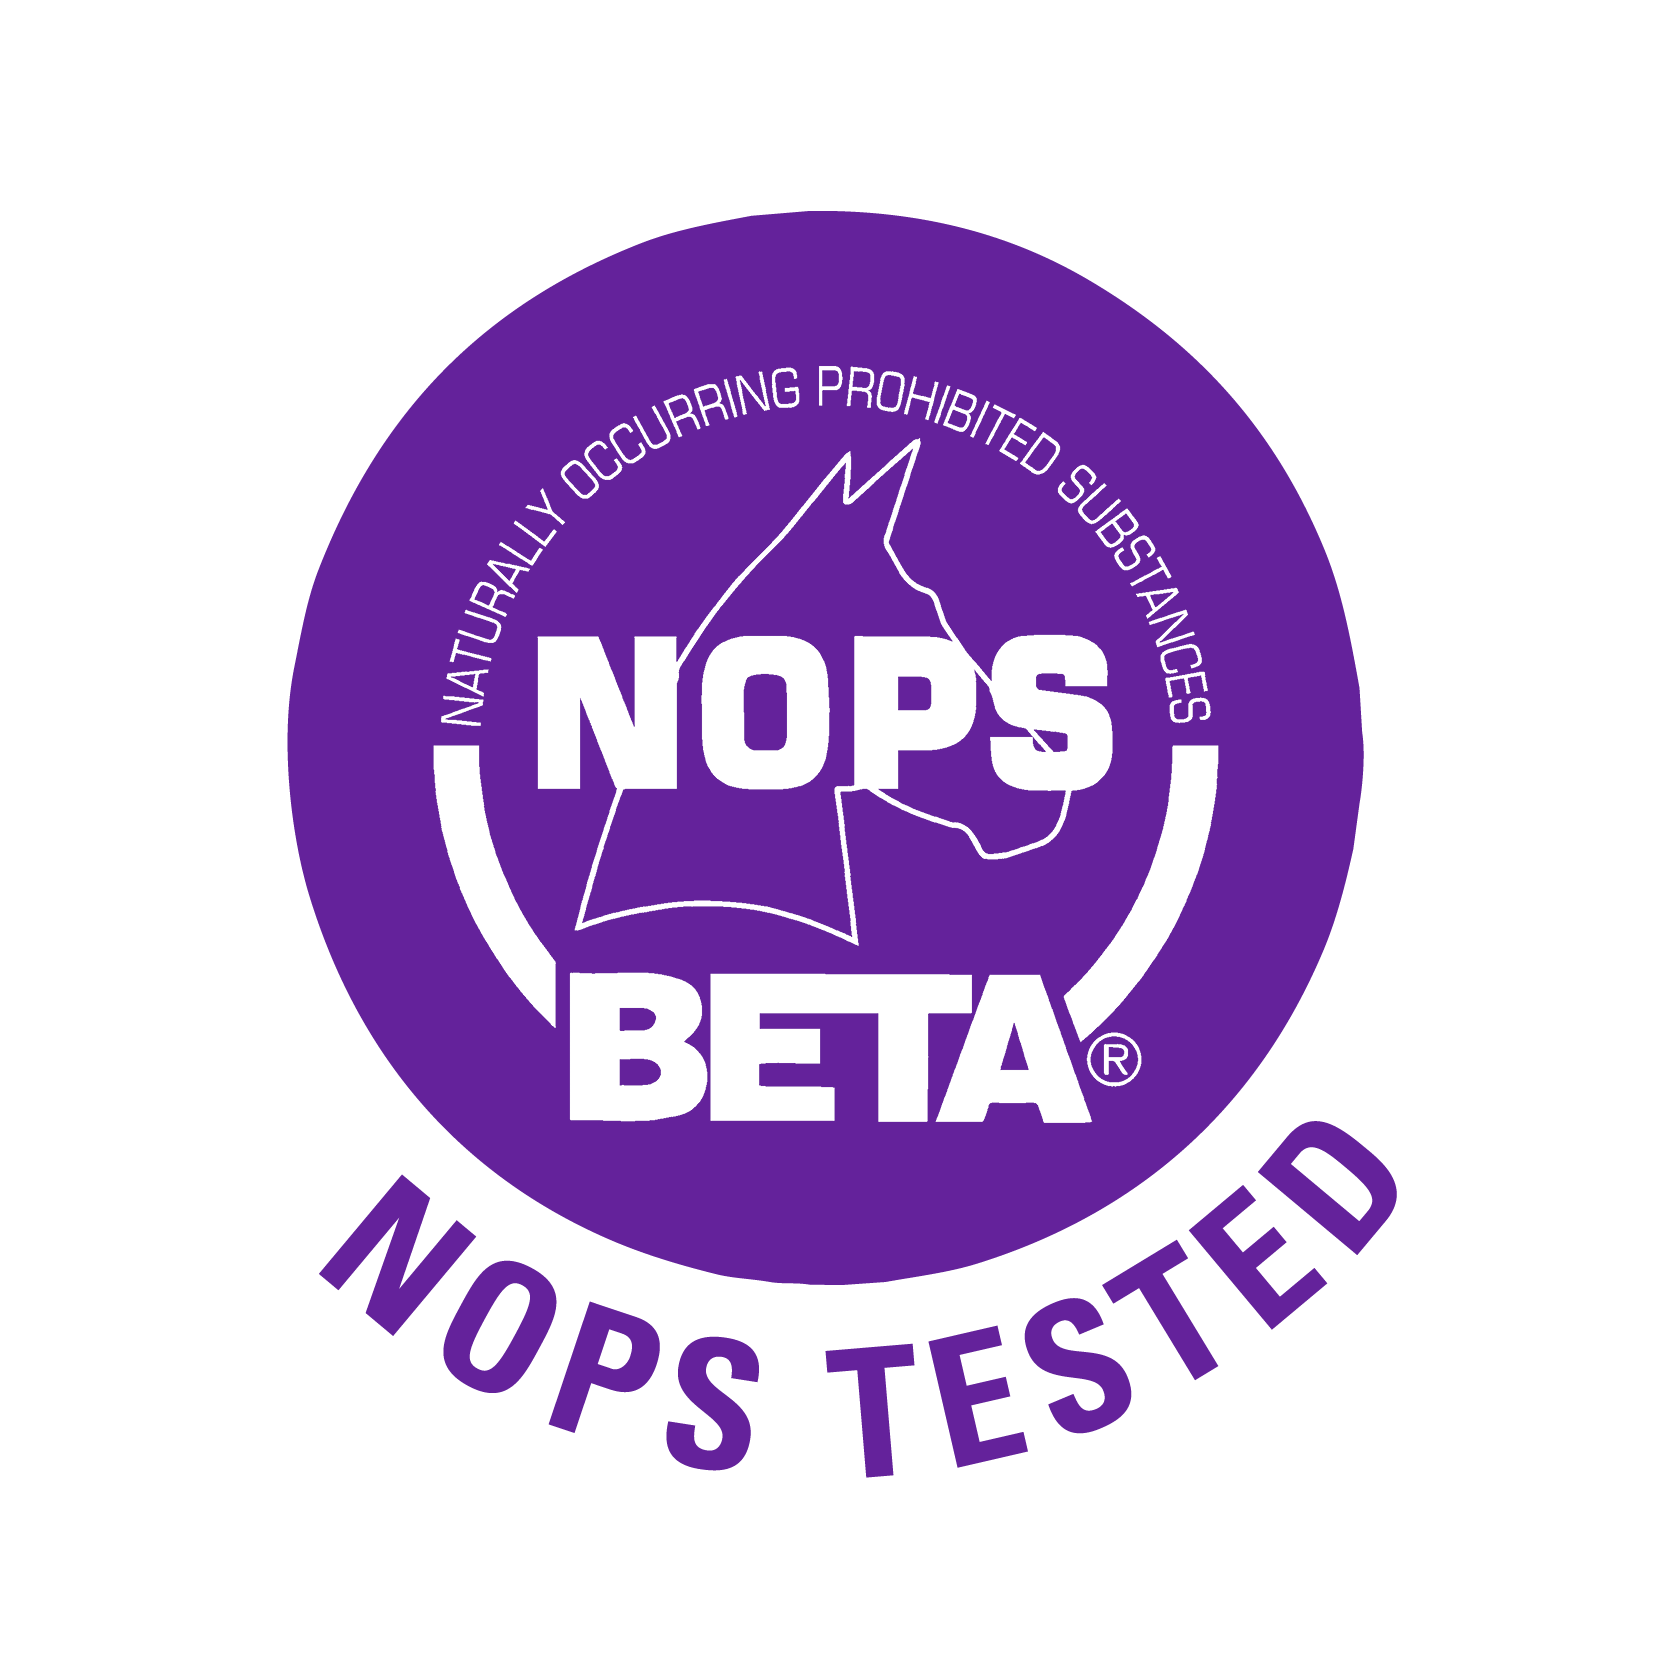 What are NOPS?